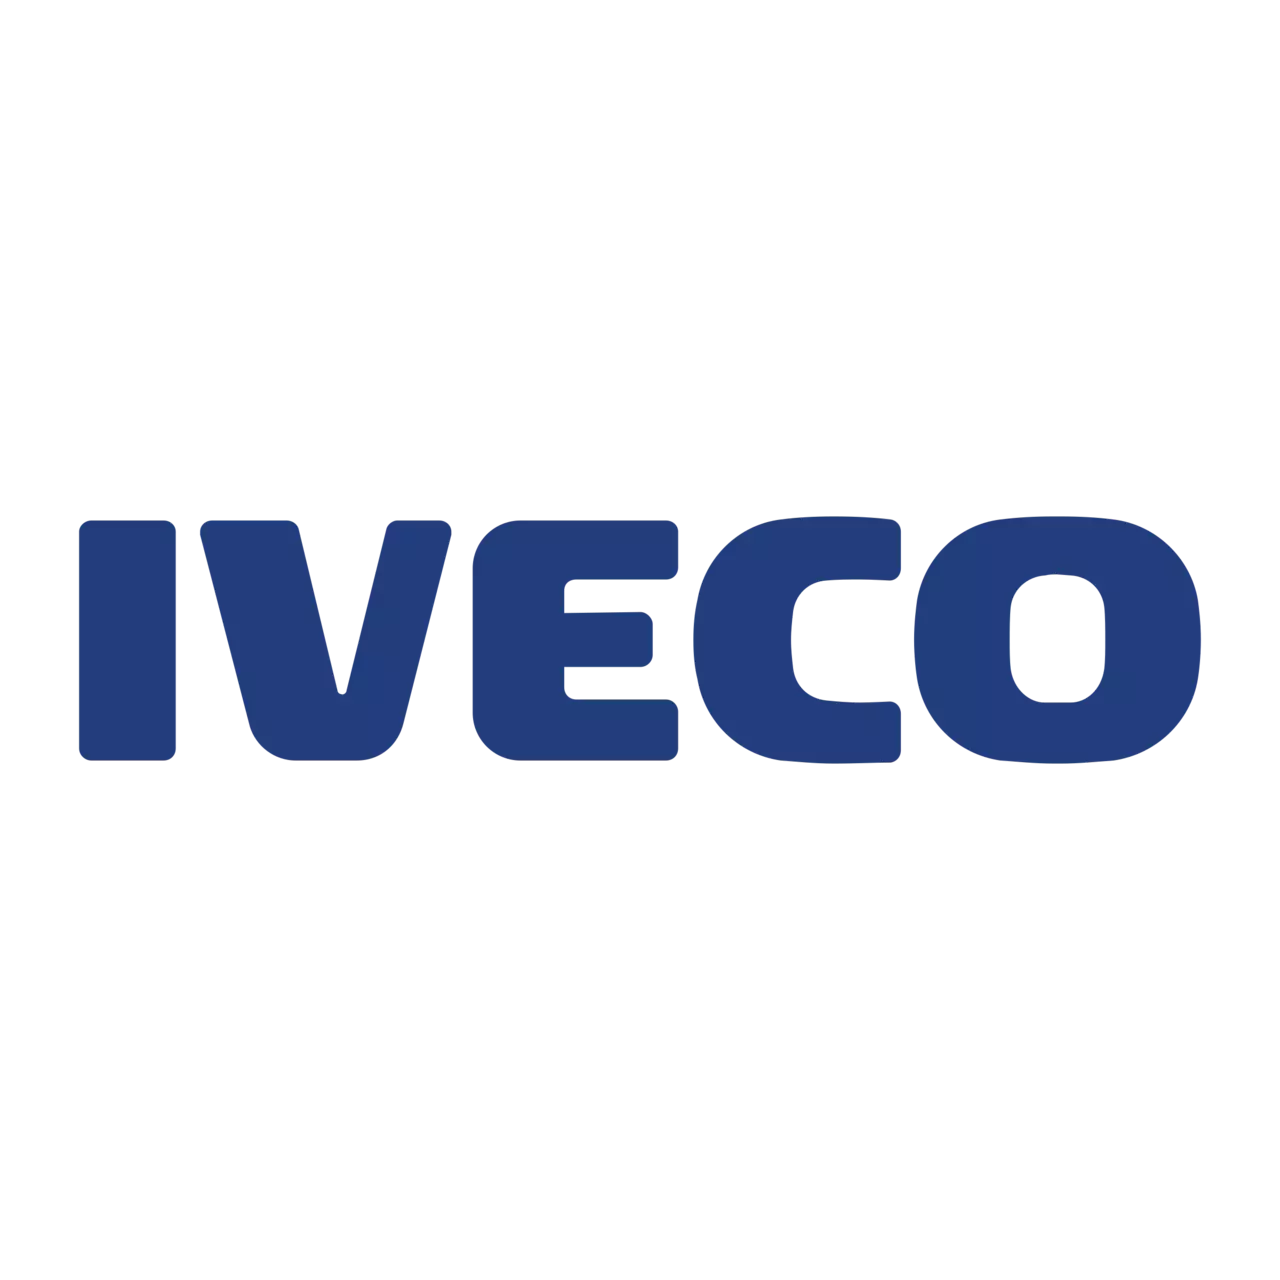 Serwis IVECO Lublin